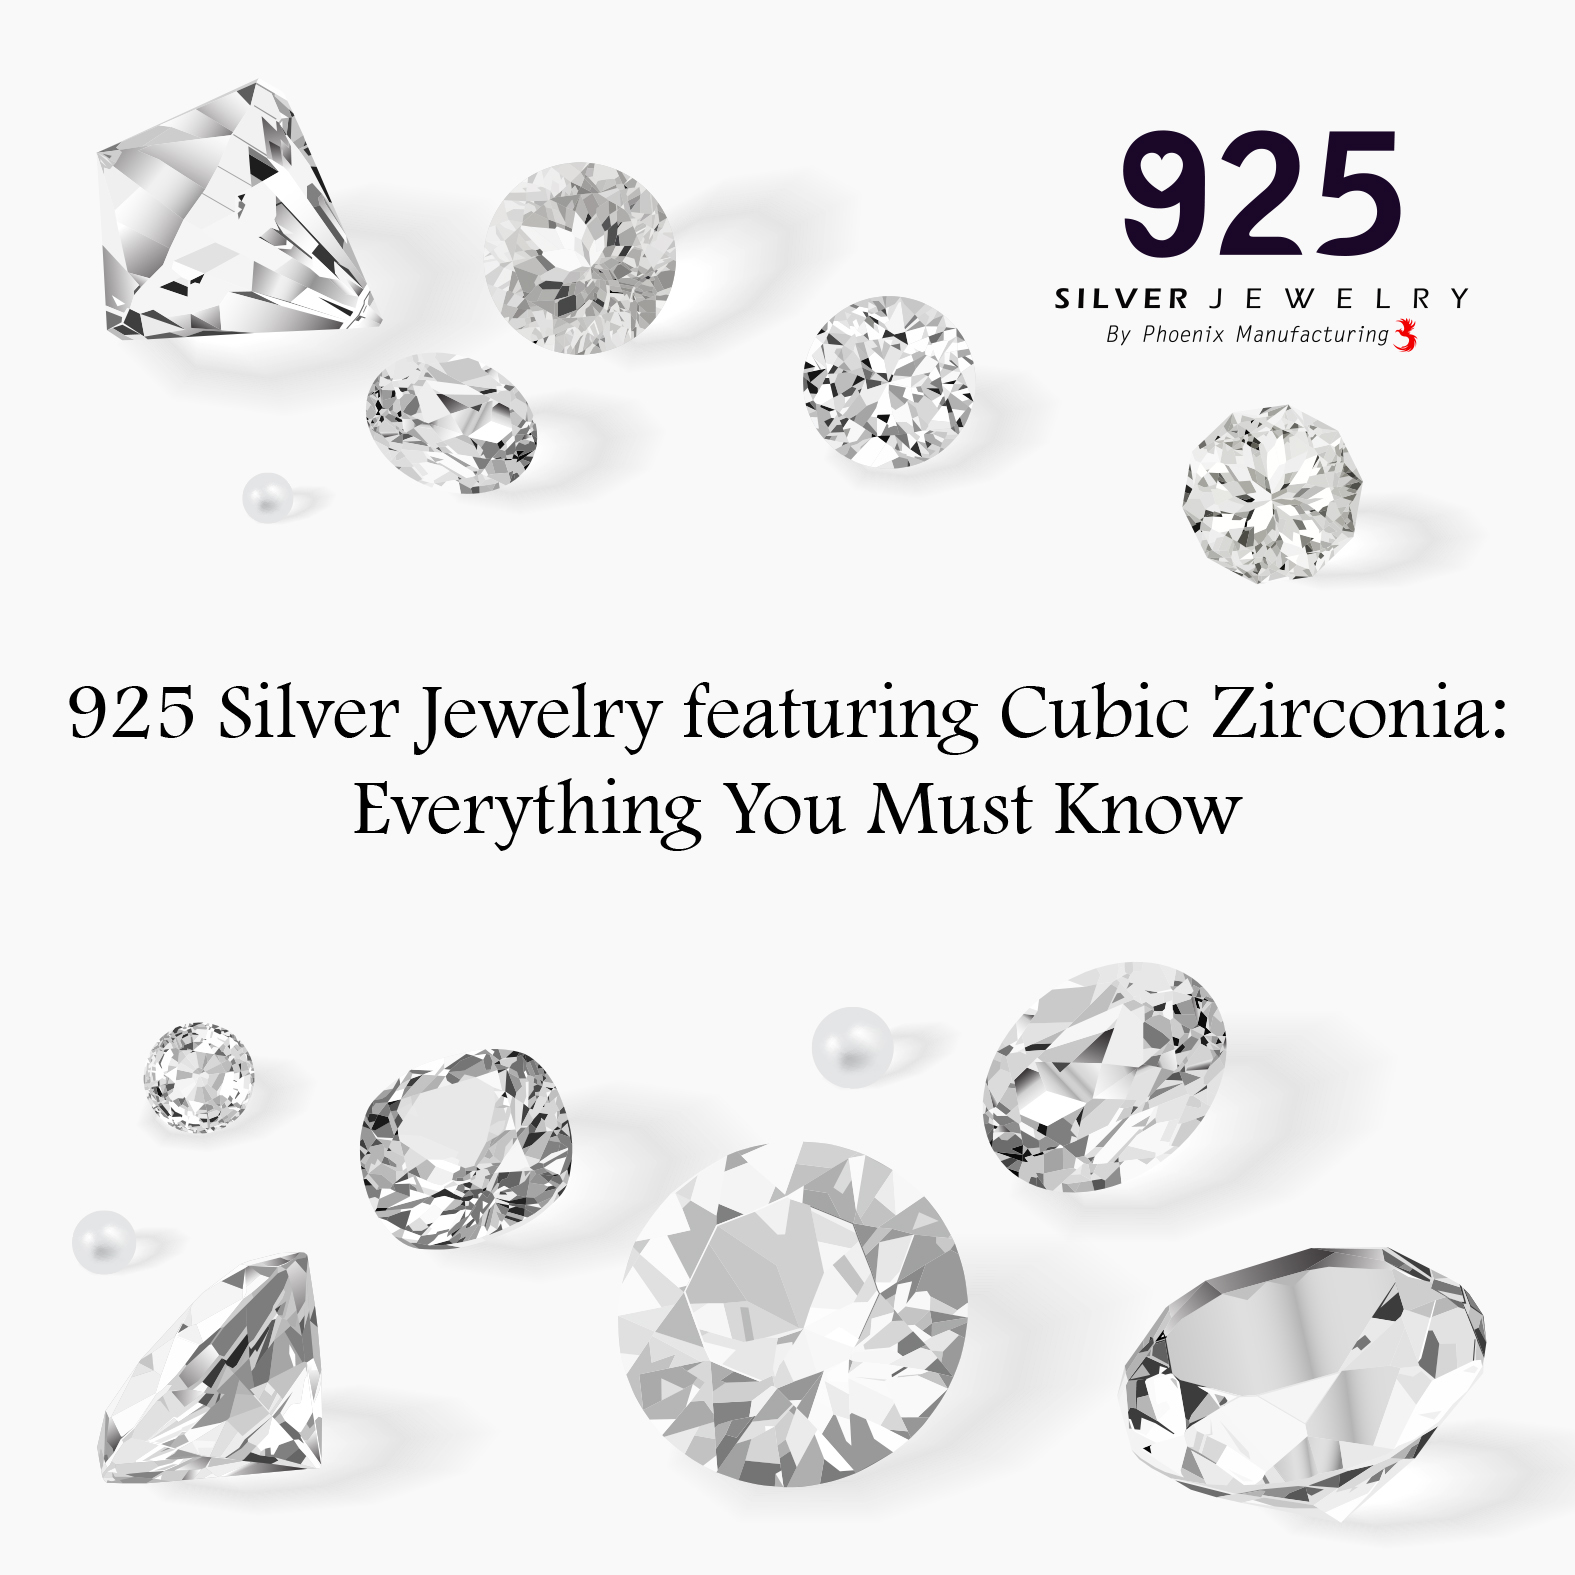 925 Silver Jewelry featuring Cubic Zirconia: Everything You Must Know